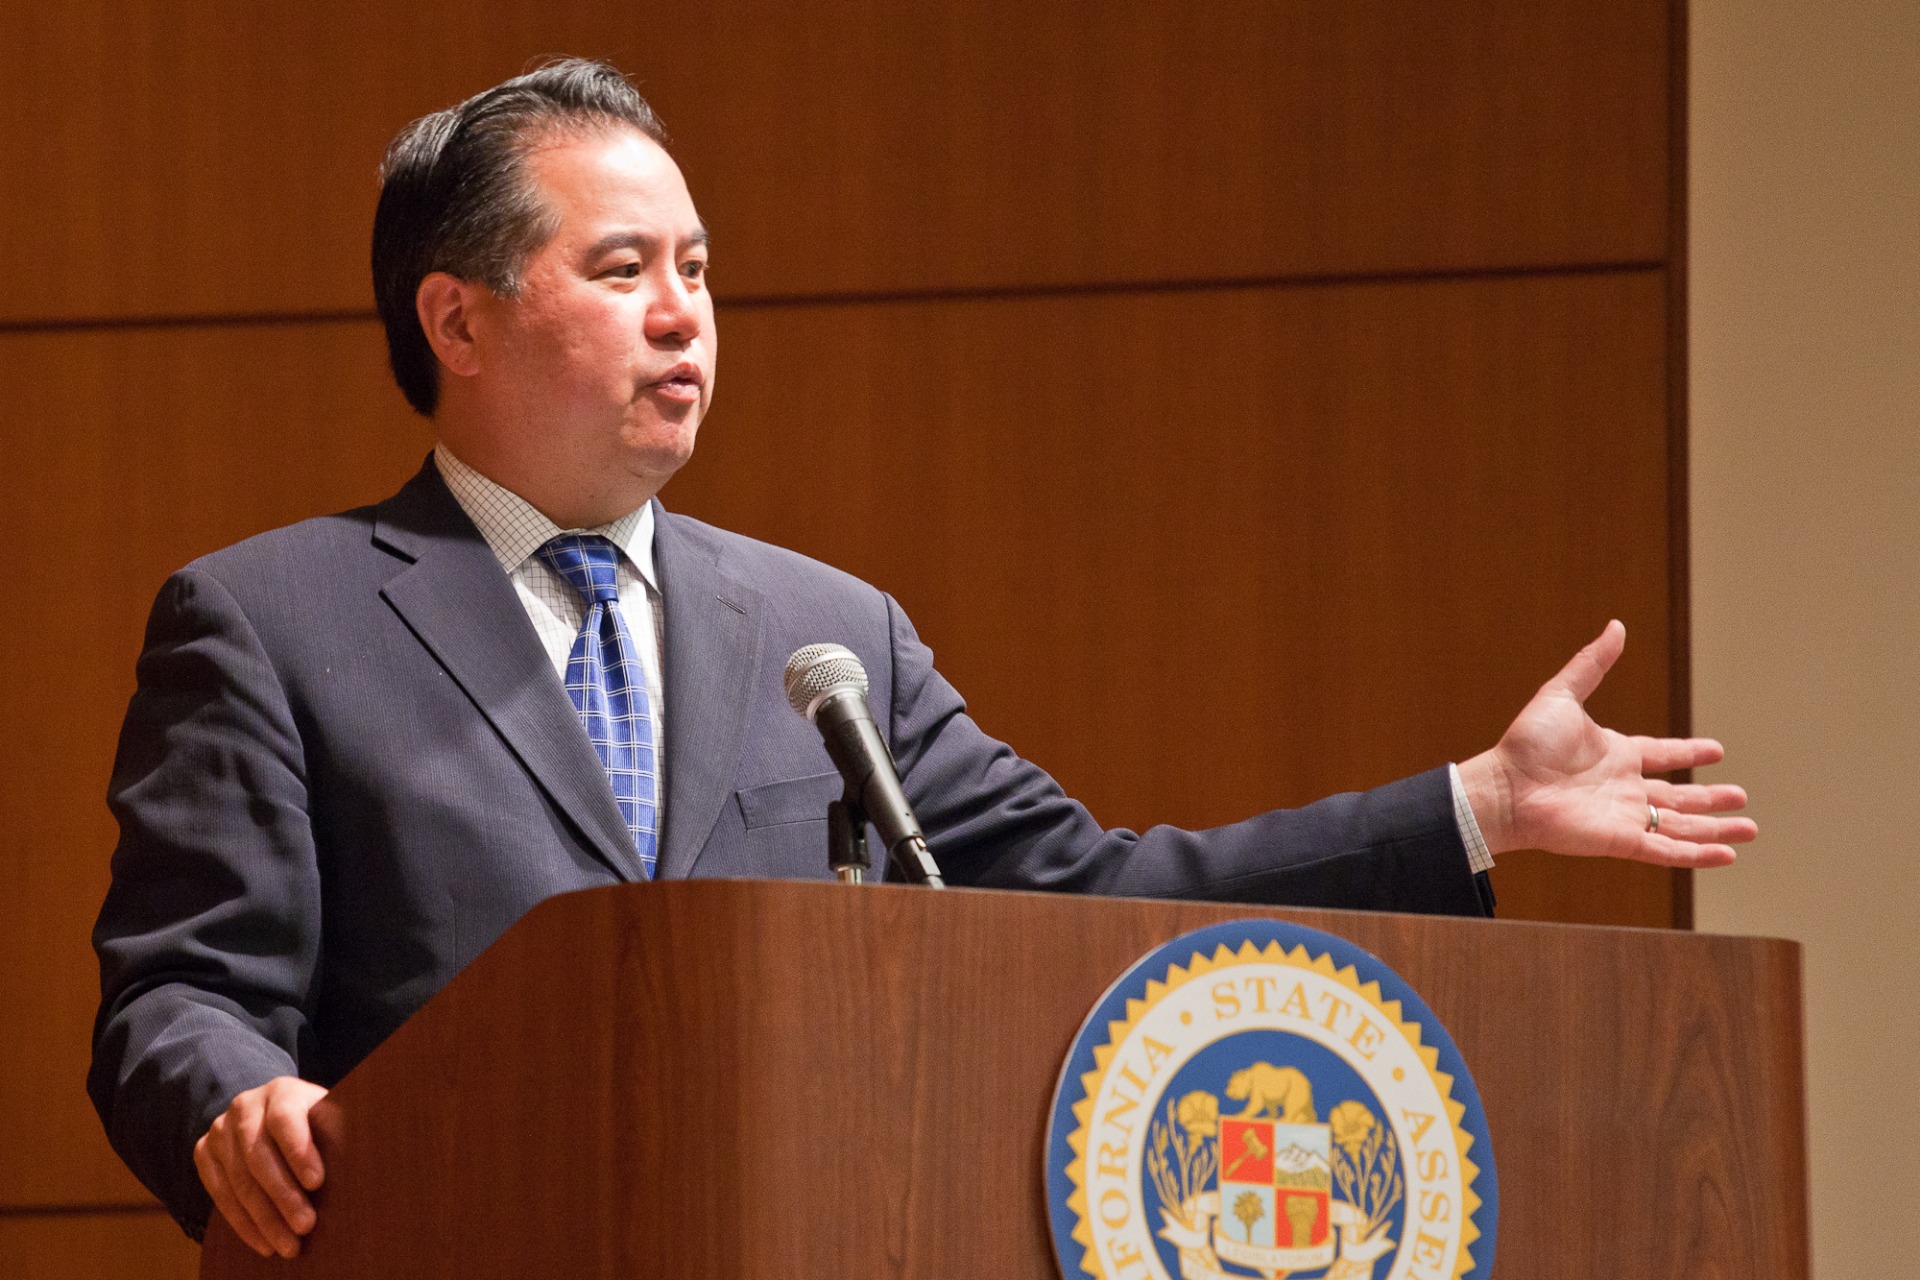 An Asian man in a suit and tie speaks from behind a dais with a California emblem.